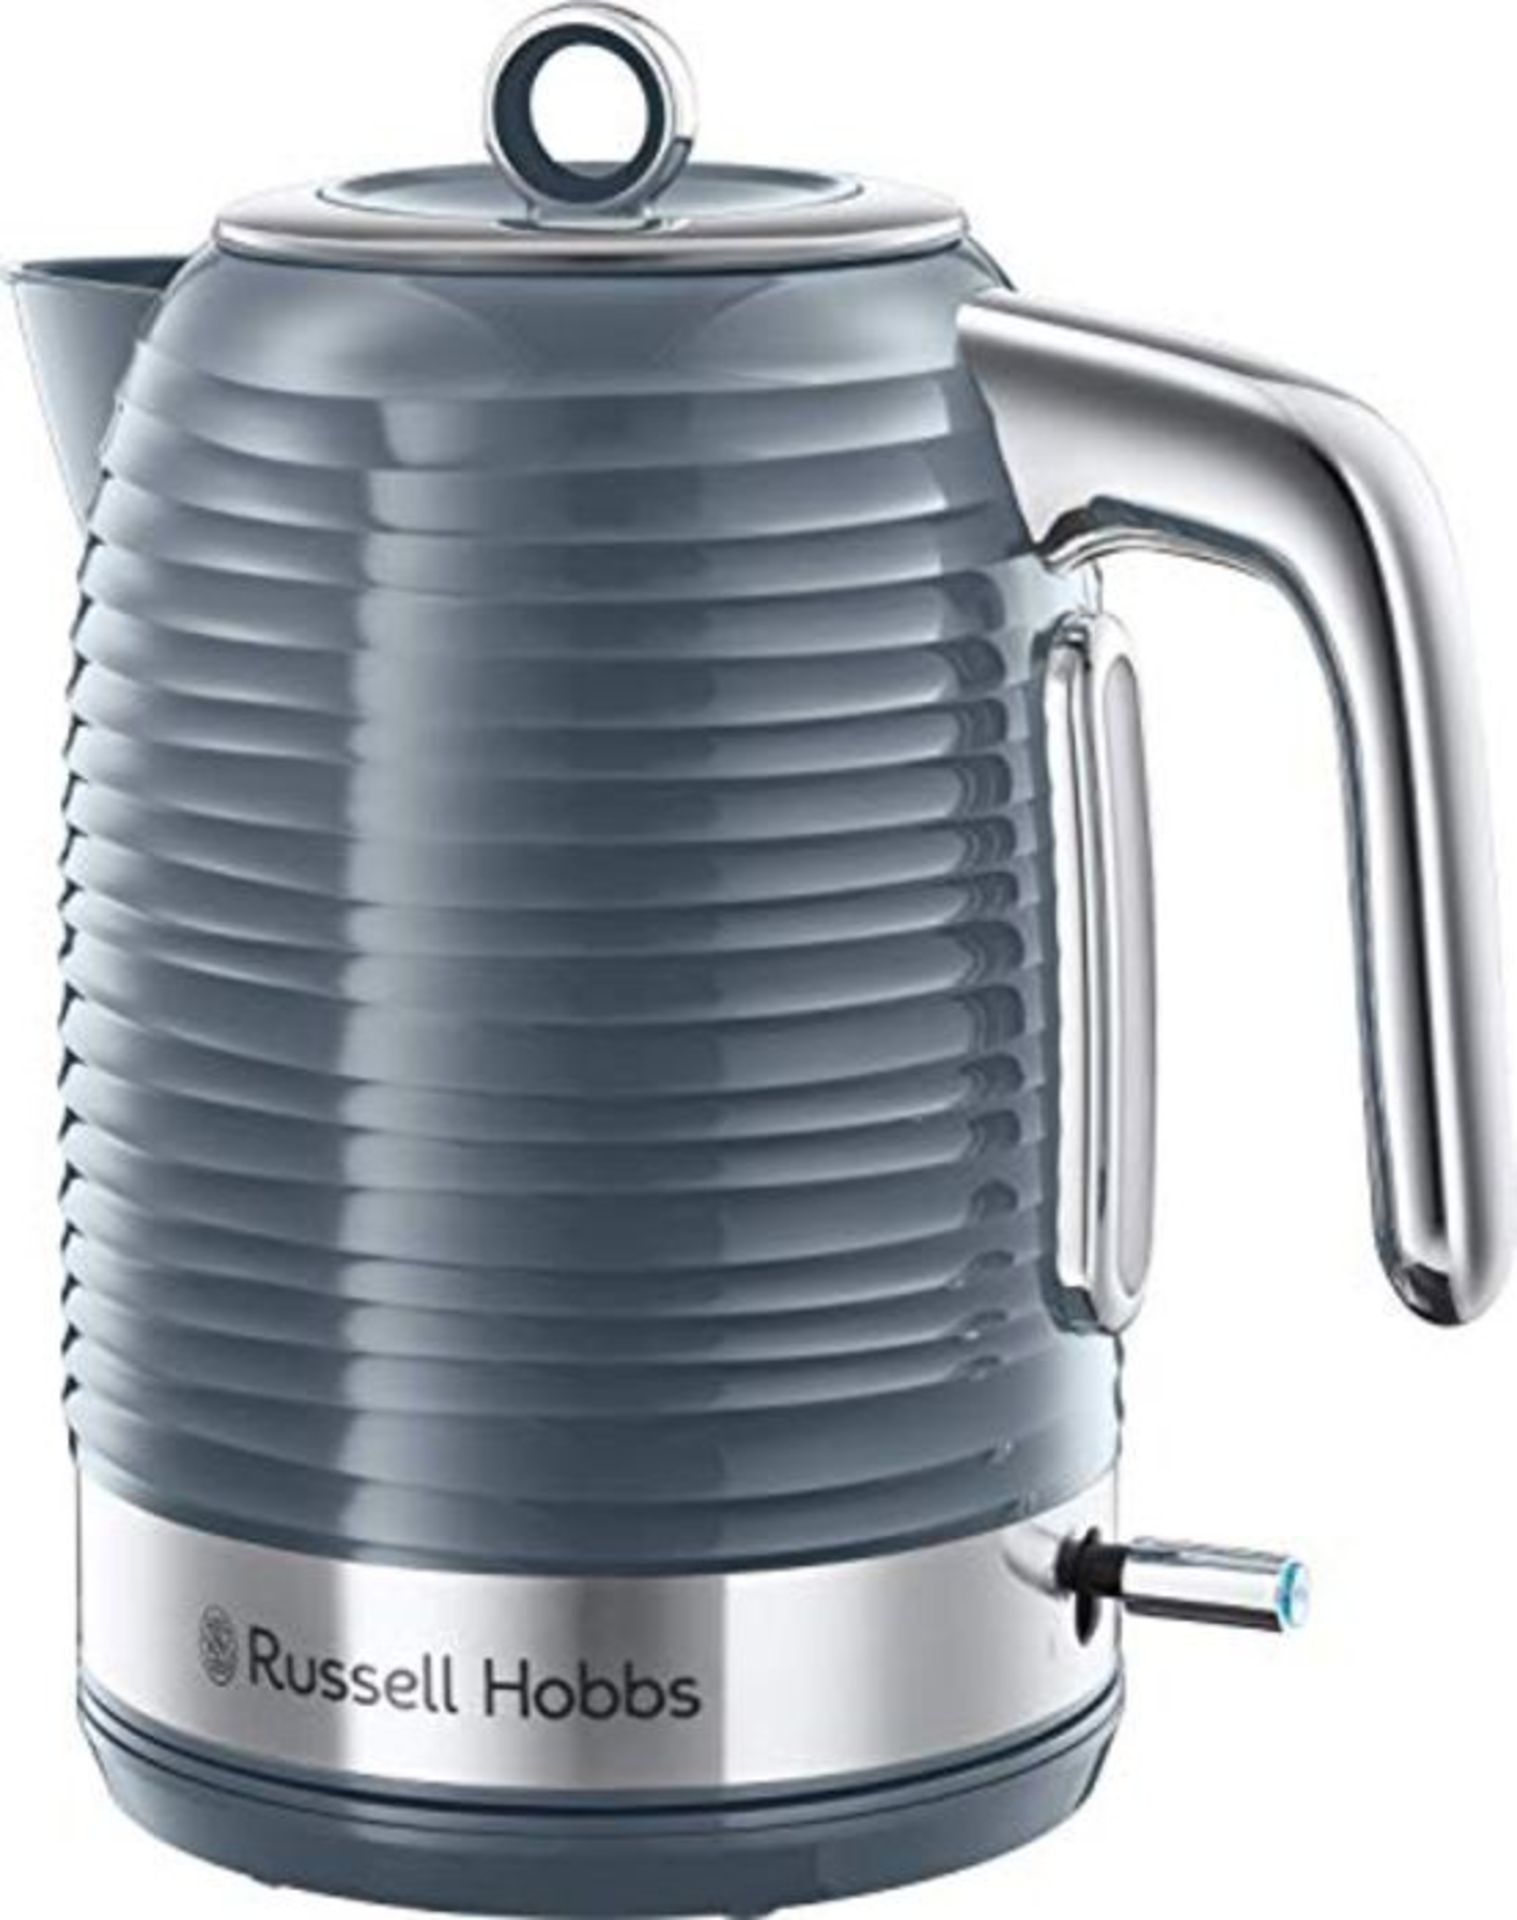 Russell Hobbs 24363 Inspire Electric Kettle, 1.7 Litre Cordless Hot Water Dispenser wi